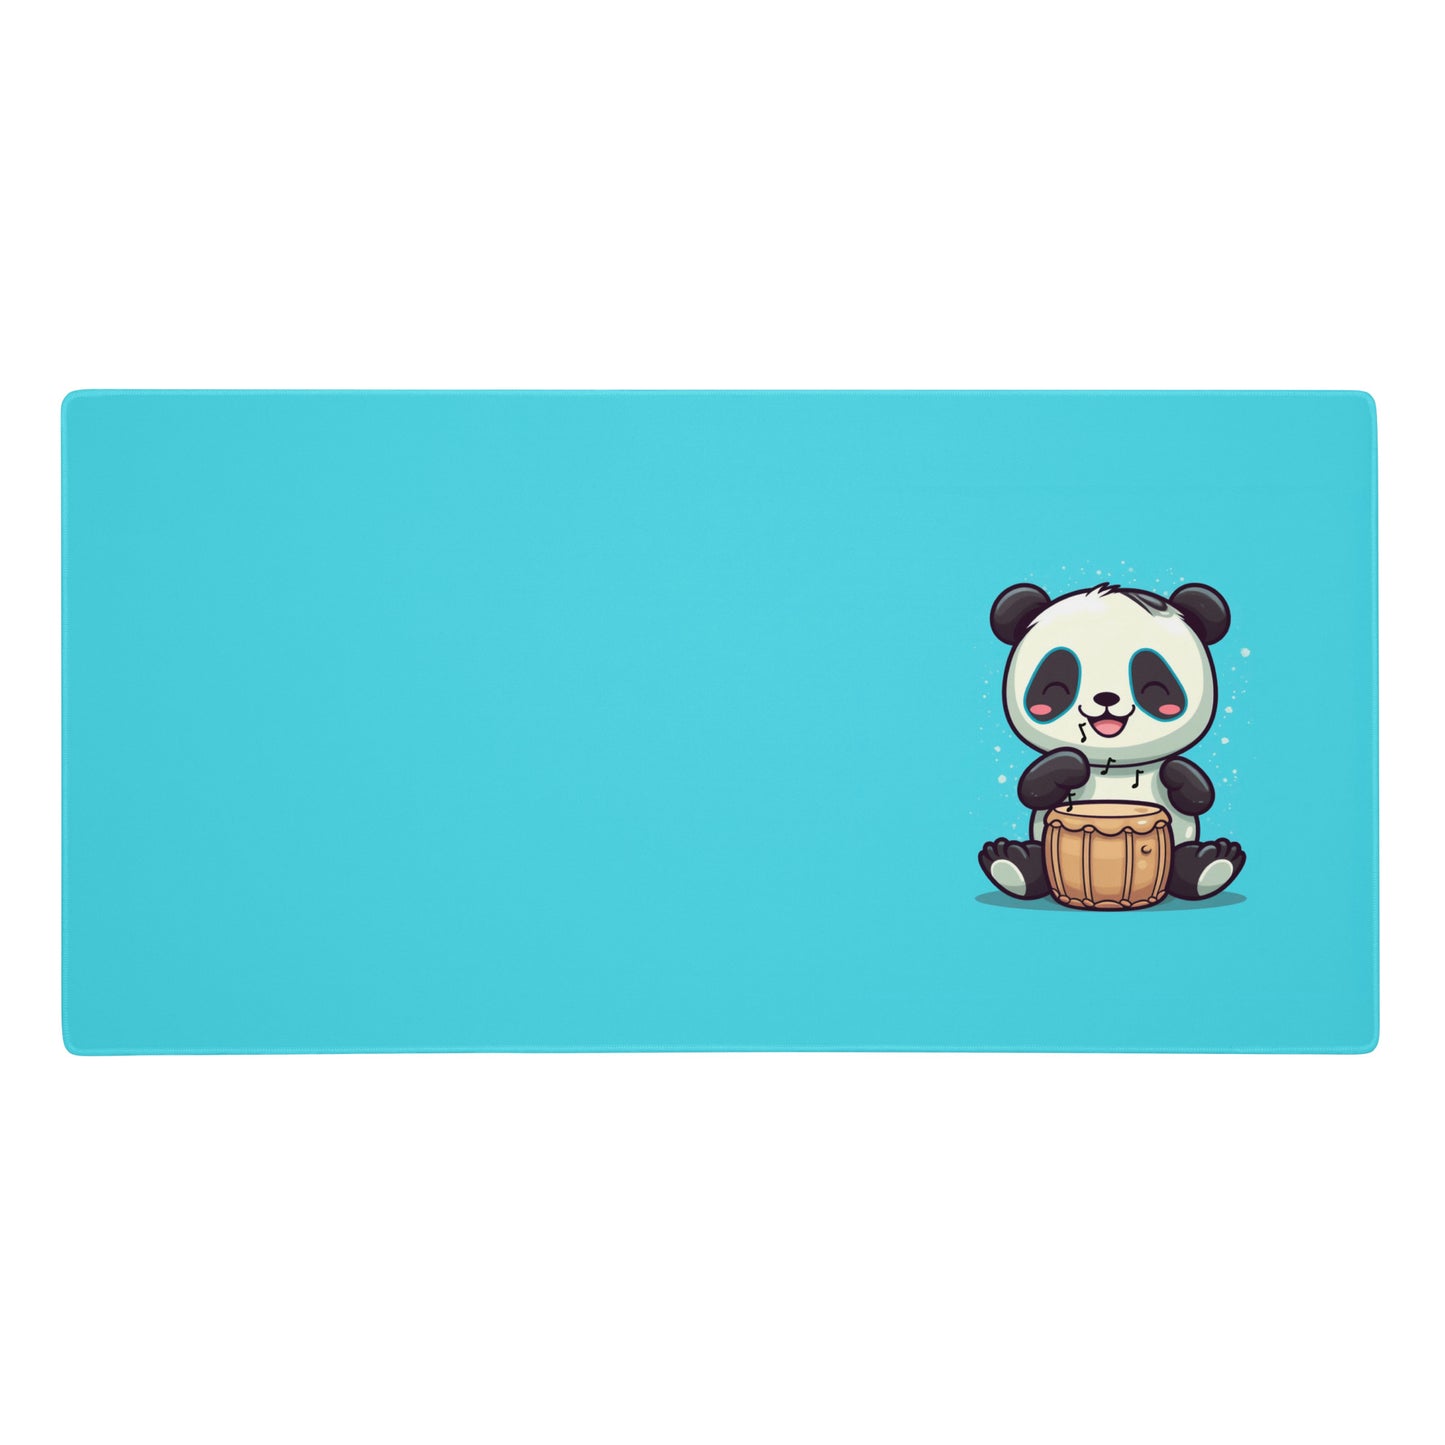 A 36" x 18" desk pad with a cute panda playing the bongos on the right. Blue in color.